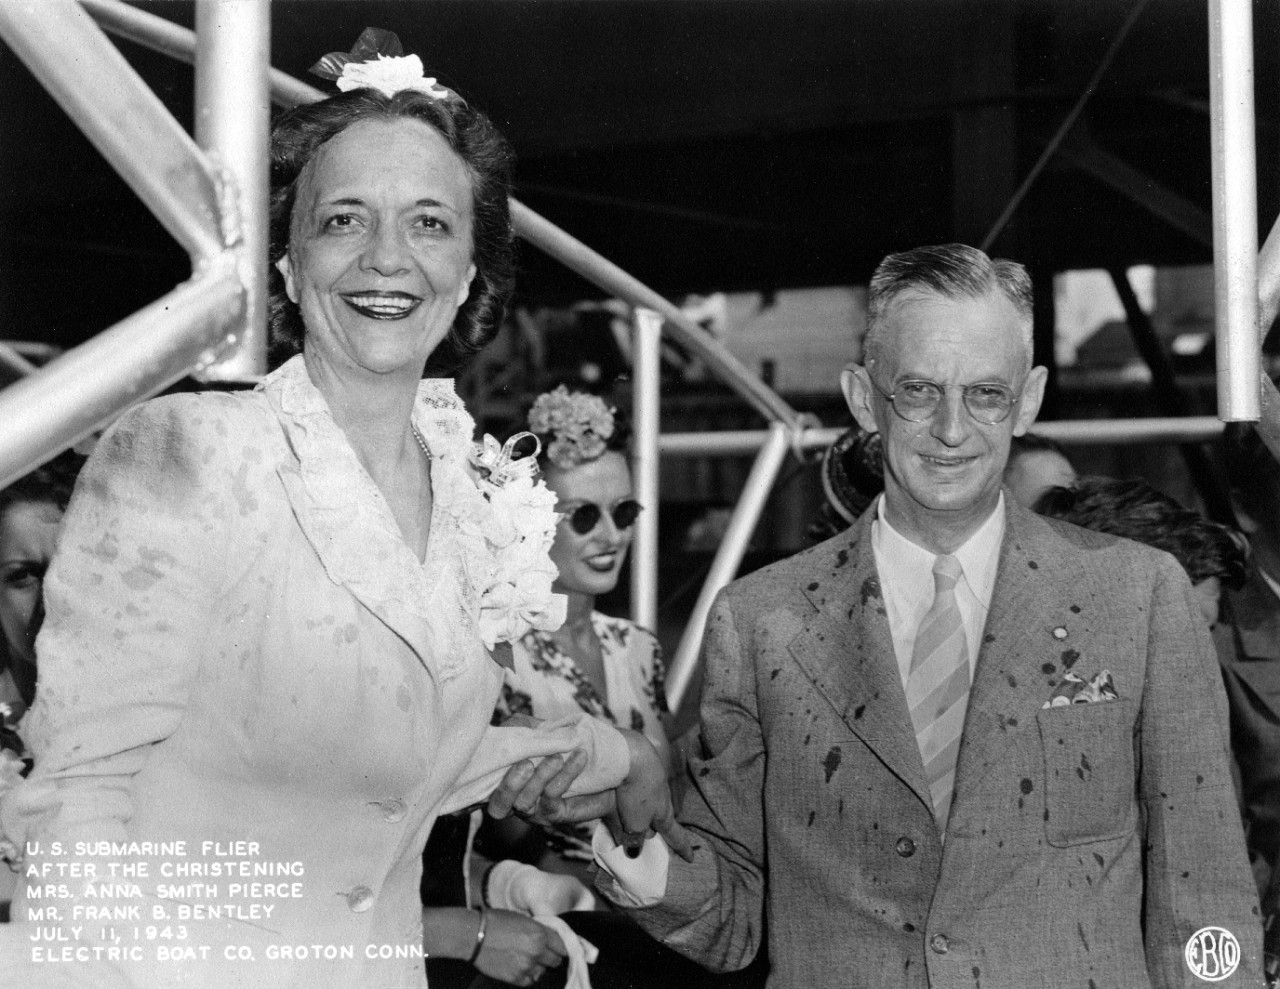 Mrs. Anna Smith Pierce and Mr. Frank B. Bentley smile after being showered with champagne at Flier’s christening at New London, 11 July 1943. (U.S. Navy Photograph 80-G-77833, National Archives and Records Administration, Still Pictures Division,...